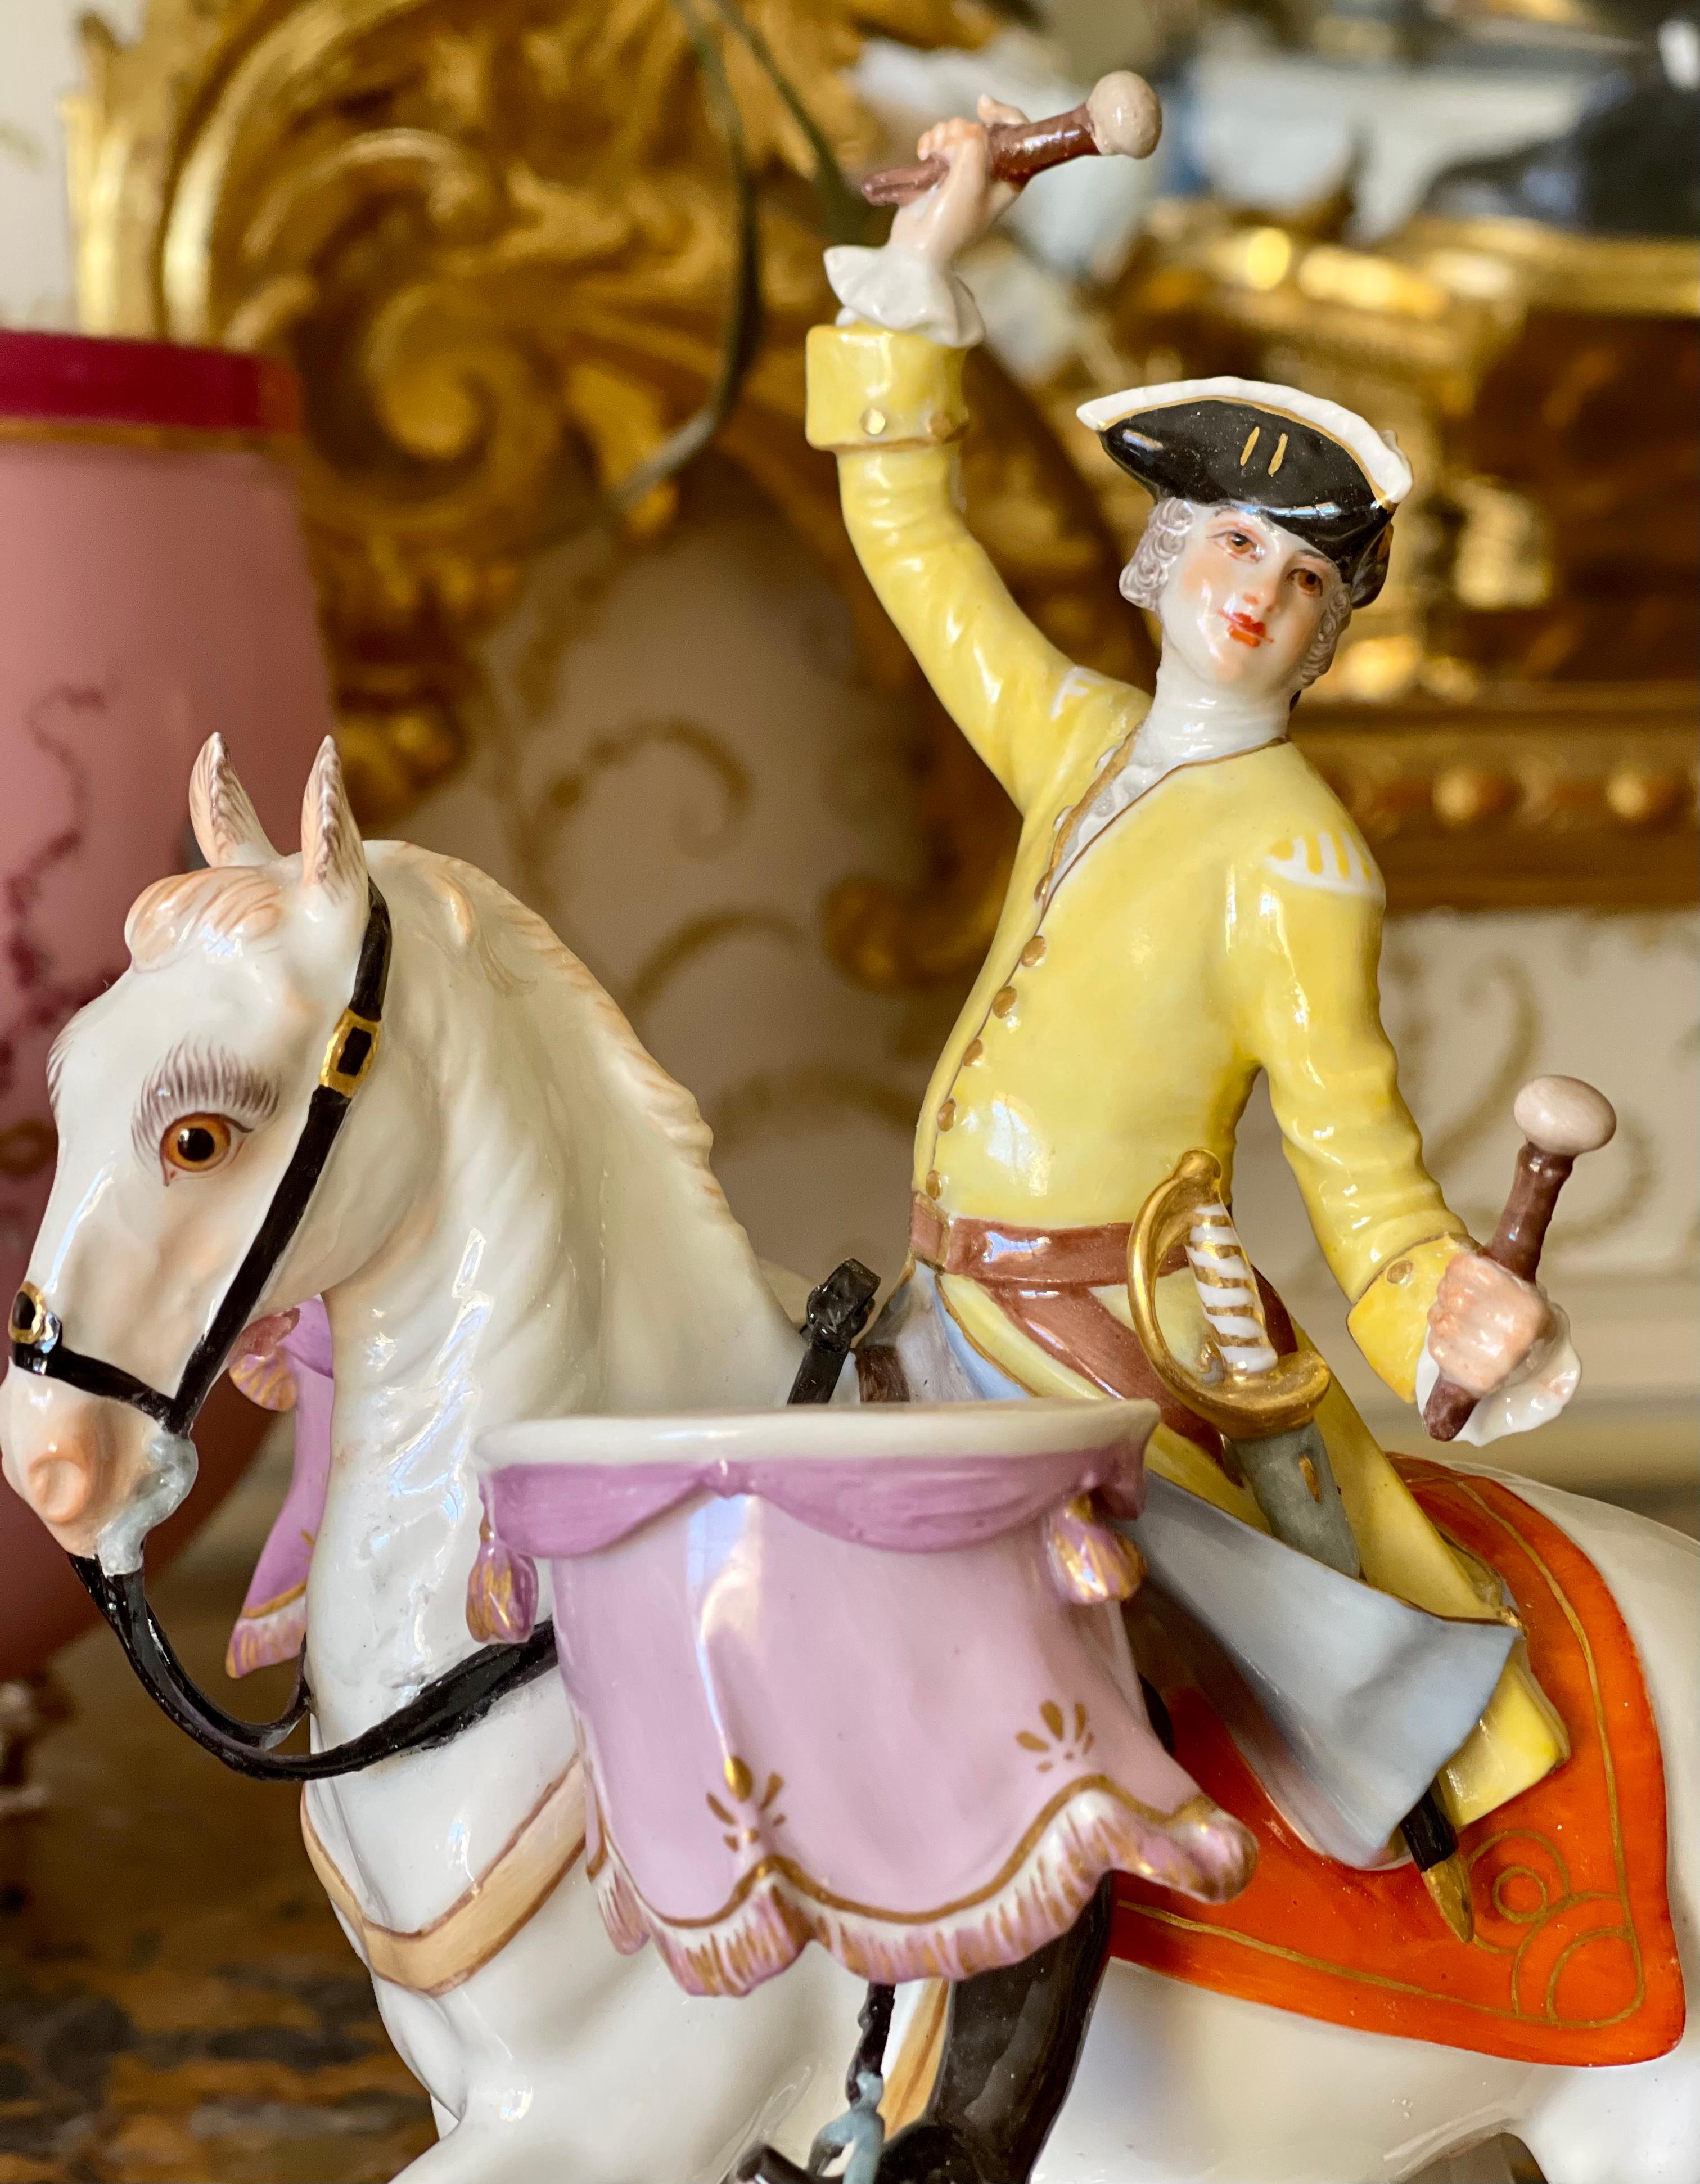 Polychrome porcelain subject depicting a horseman on the drum in perfect condition. Features the Meissen mark underneath and it is also dated 1963.